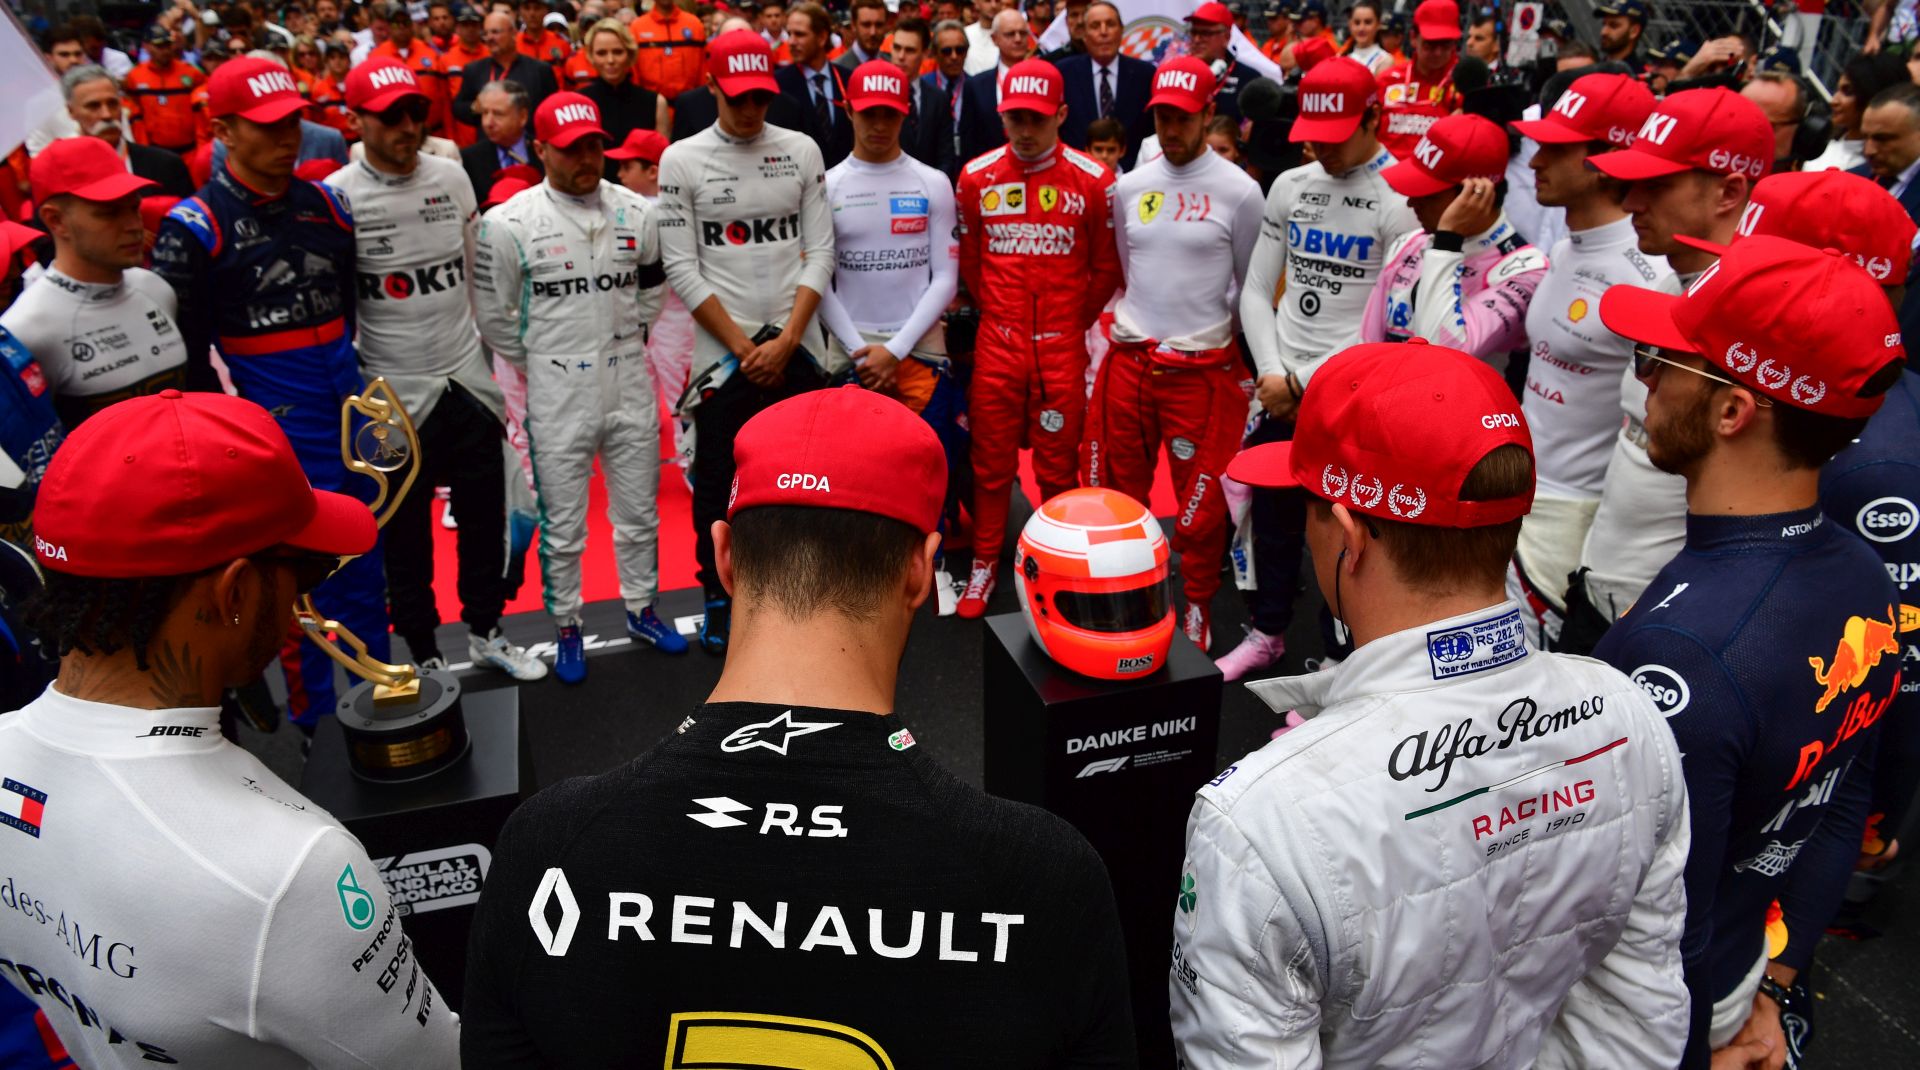 epa07602885 Formula One drivers observe a minute's silence in tribute to late Formula One legend Niki Lauda prior to 2019 Formula One Grand Prix of Monaco at the Monte Carlo circuit in Monaco, 26 May 2019.  EPA/ANDREJ ISAKOVIC / POOL